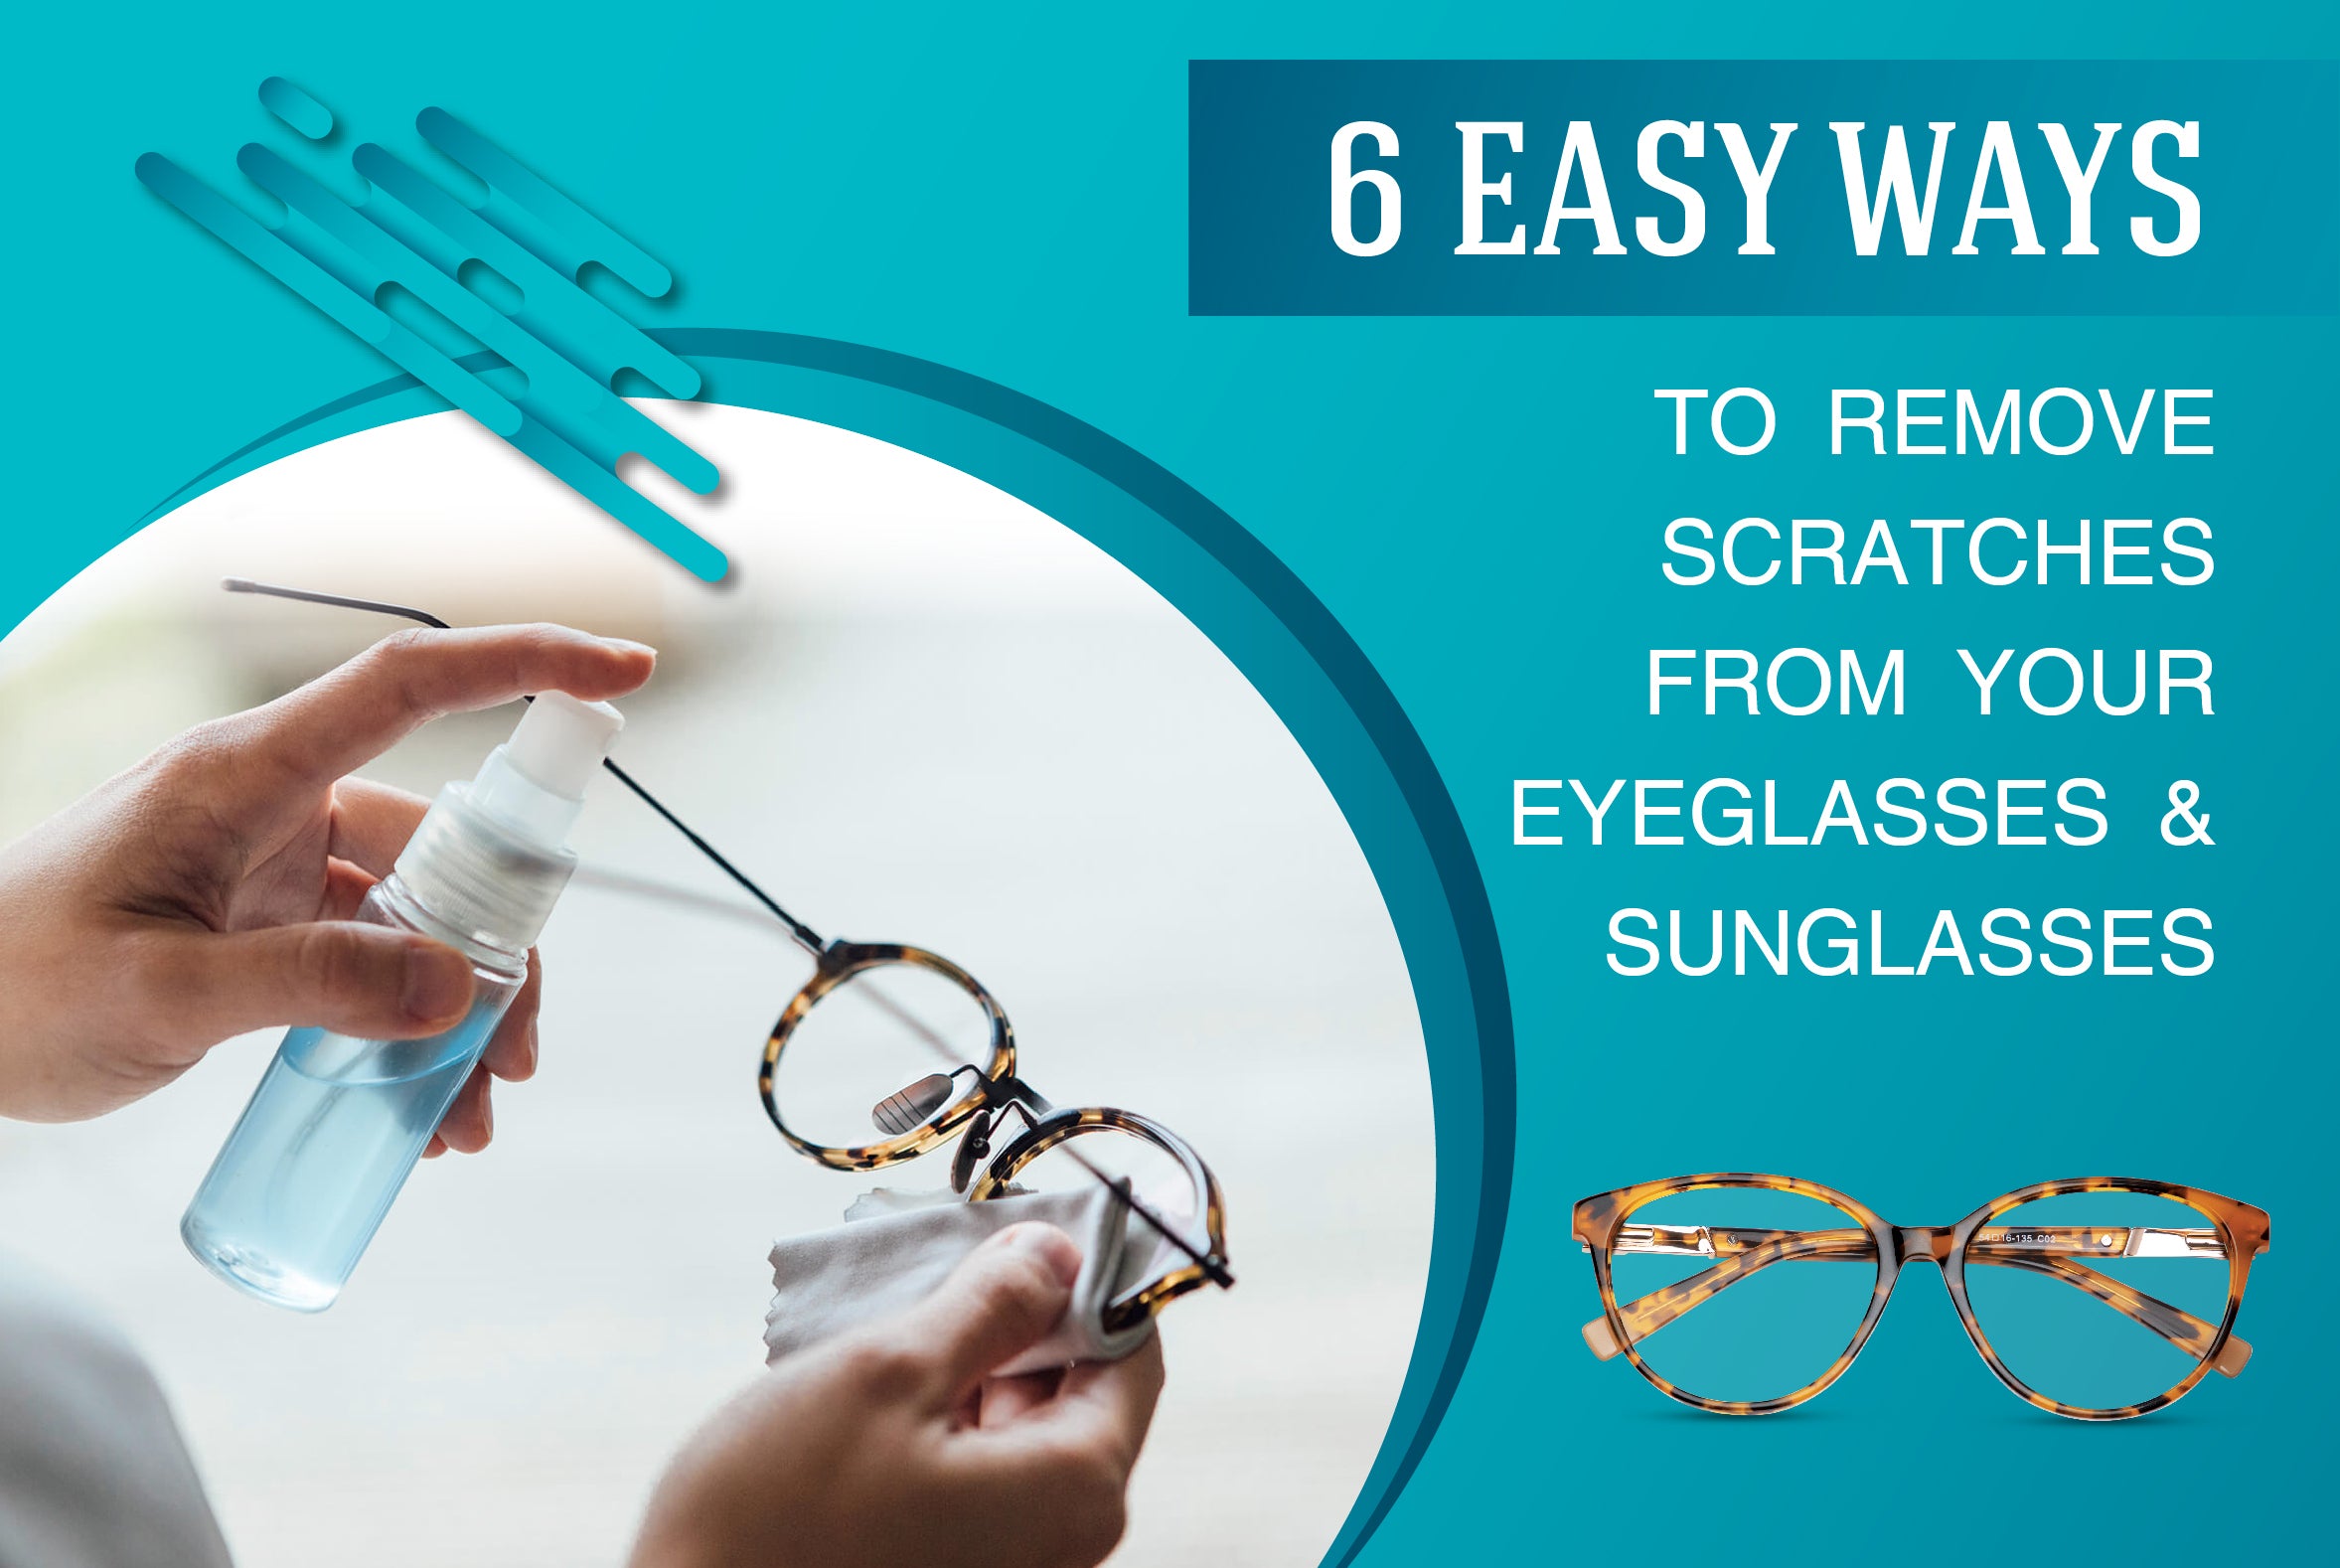 How to Clean Eyeglasses with an Anti-Reflective Coating